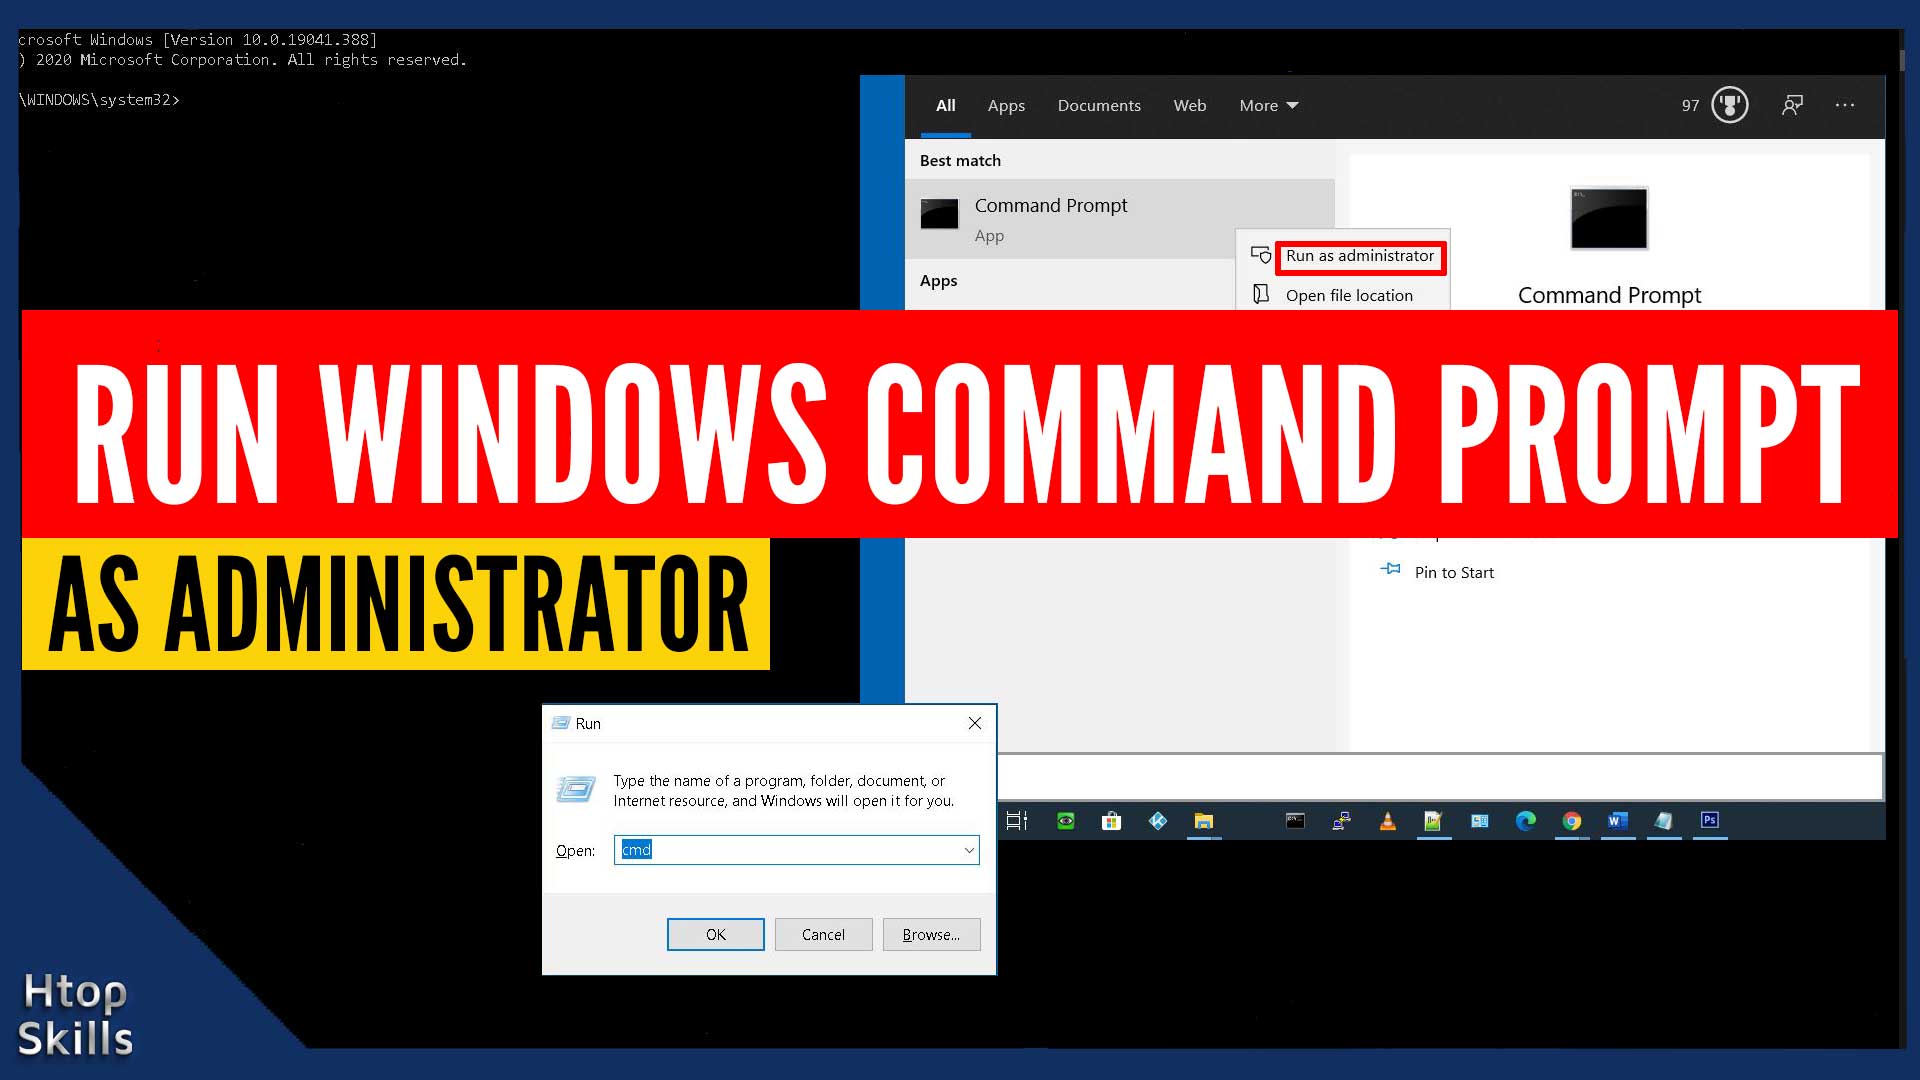 Windows command prompt as administrator, Windows run window and Windows search with command propmt as administrator